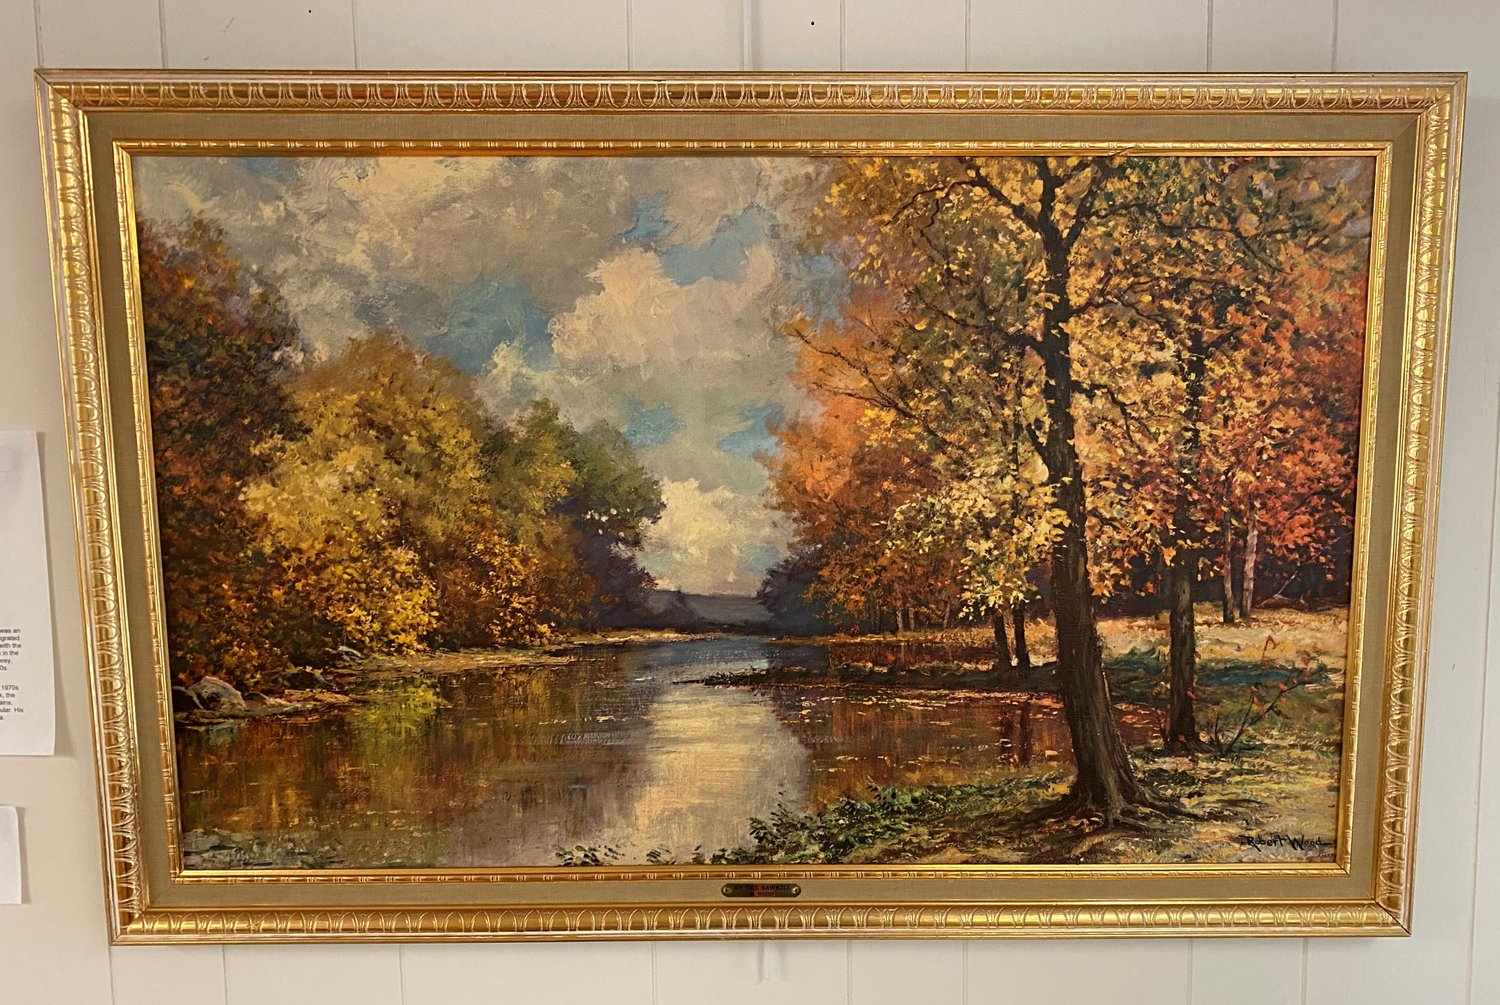 "At the Sawkill" by Robert Wood is one of many artworks available for adoption.